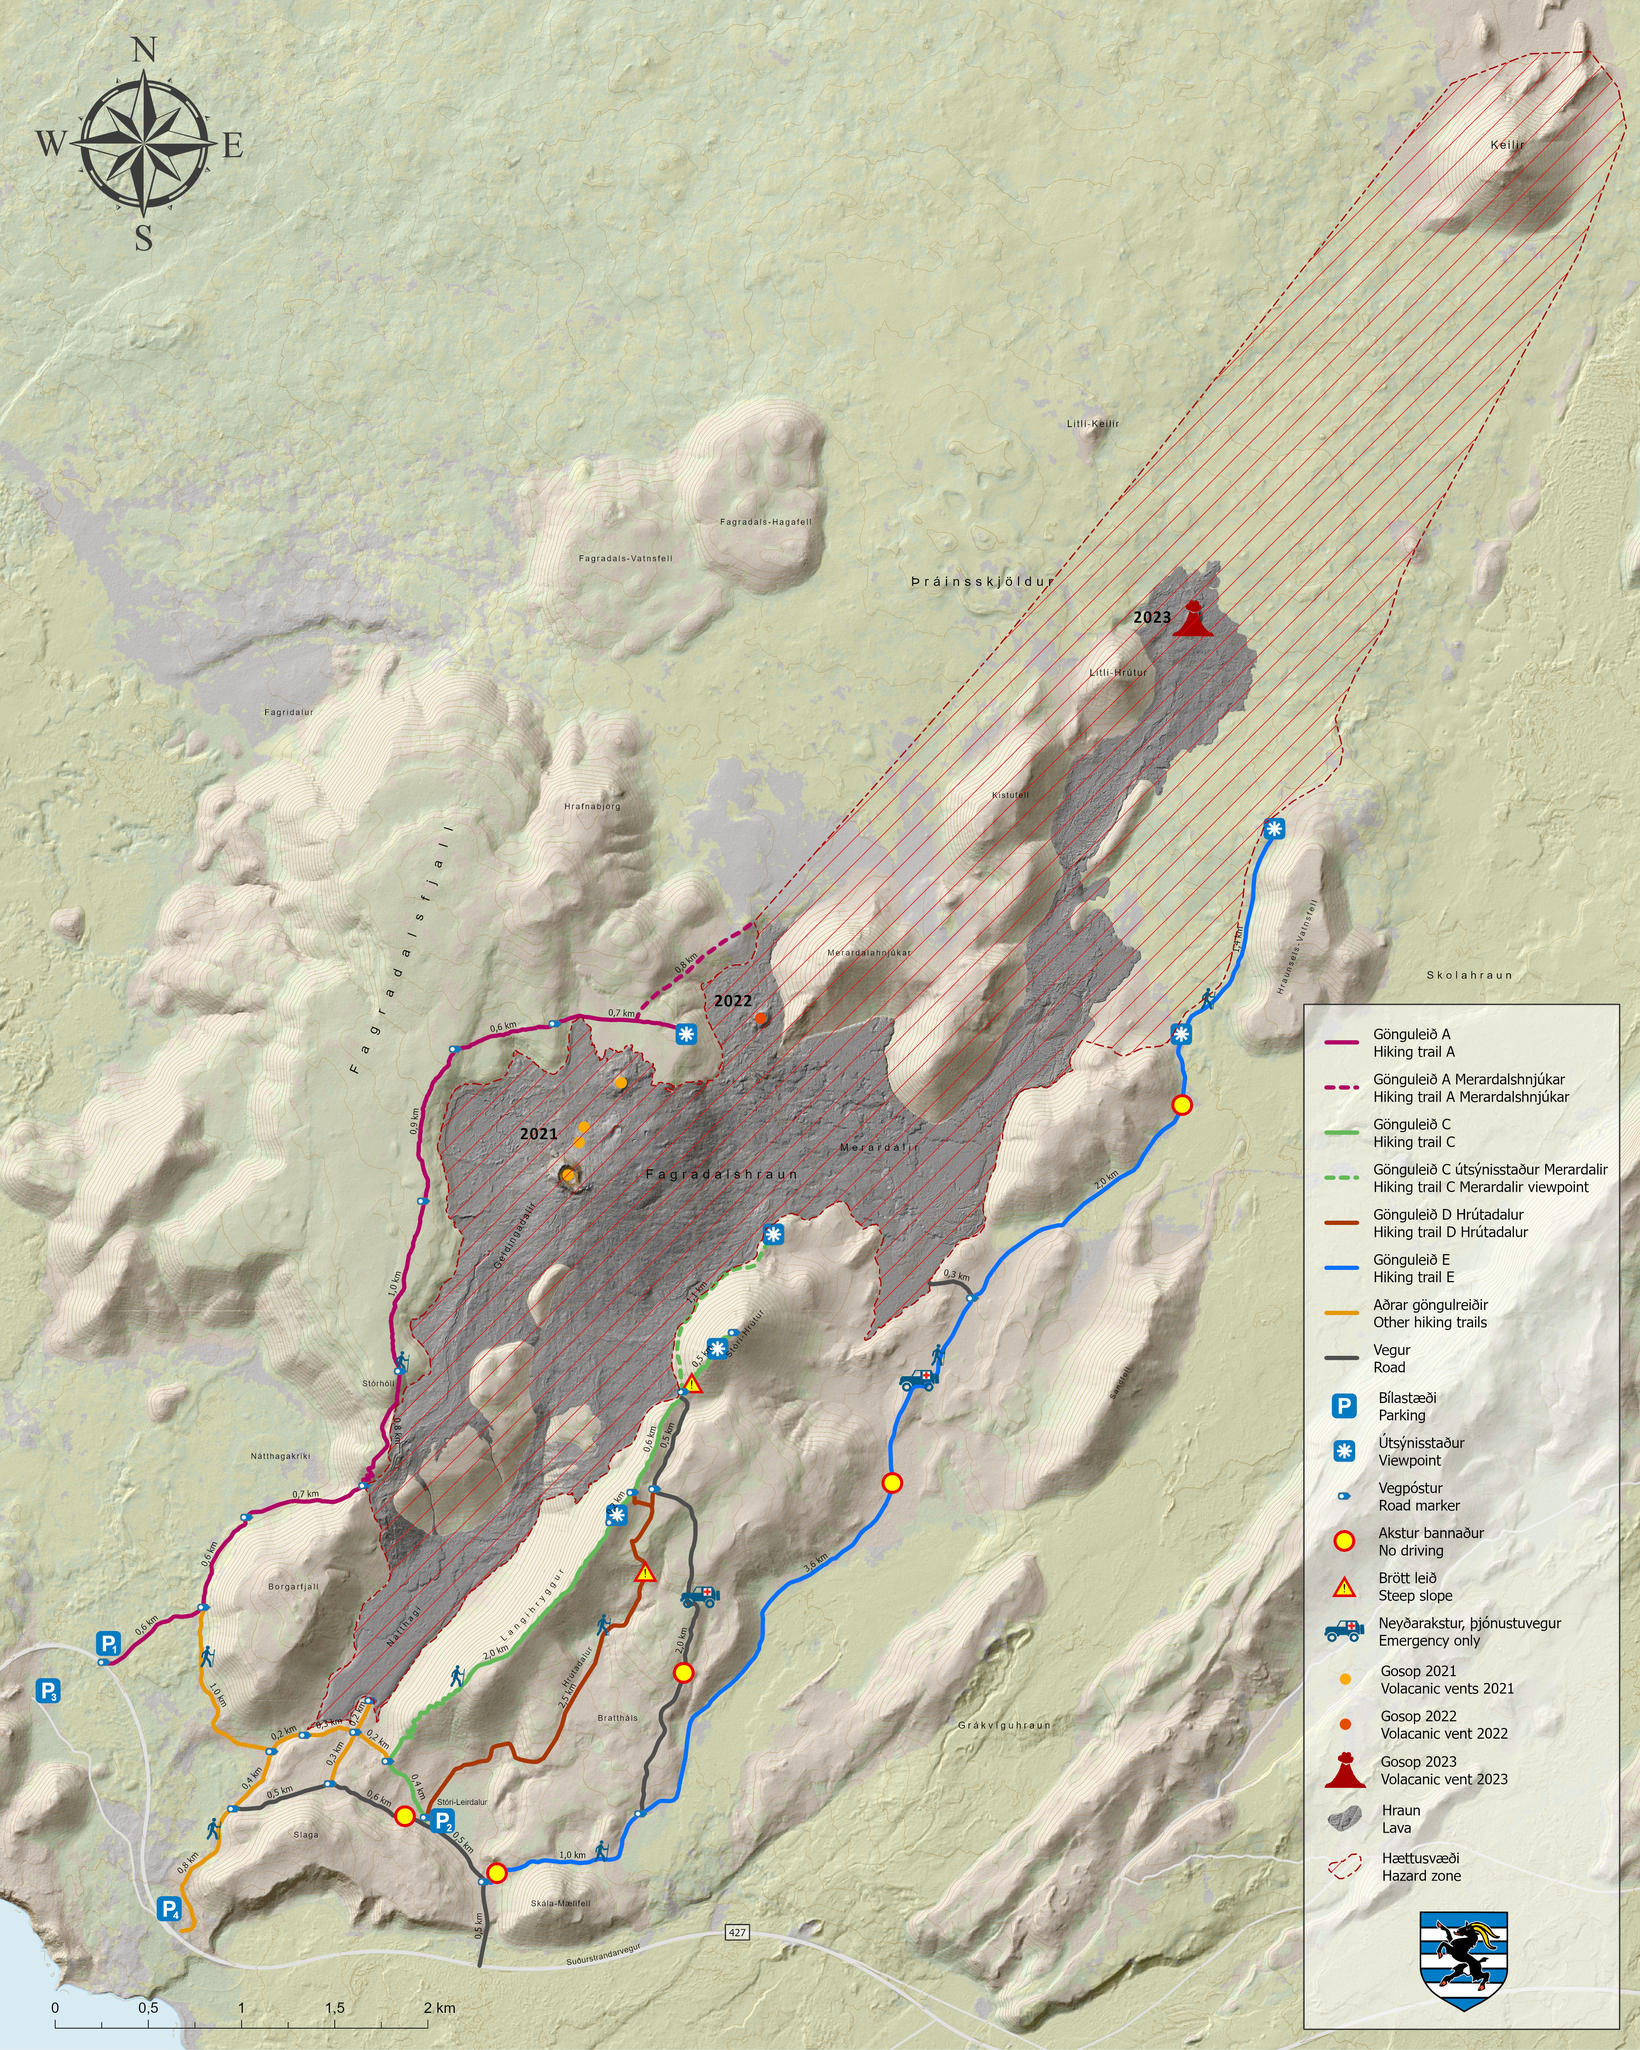 A walking map of the eruption area.